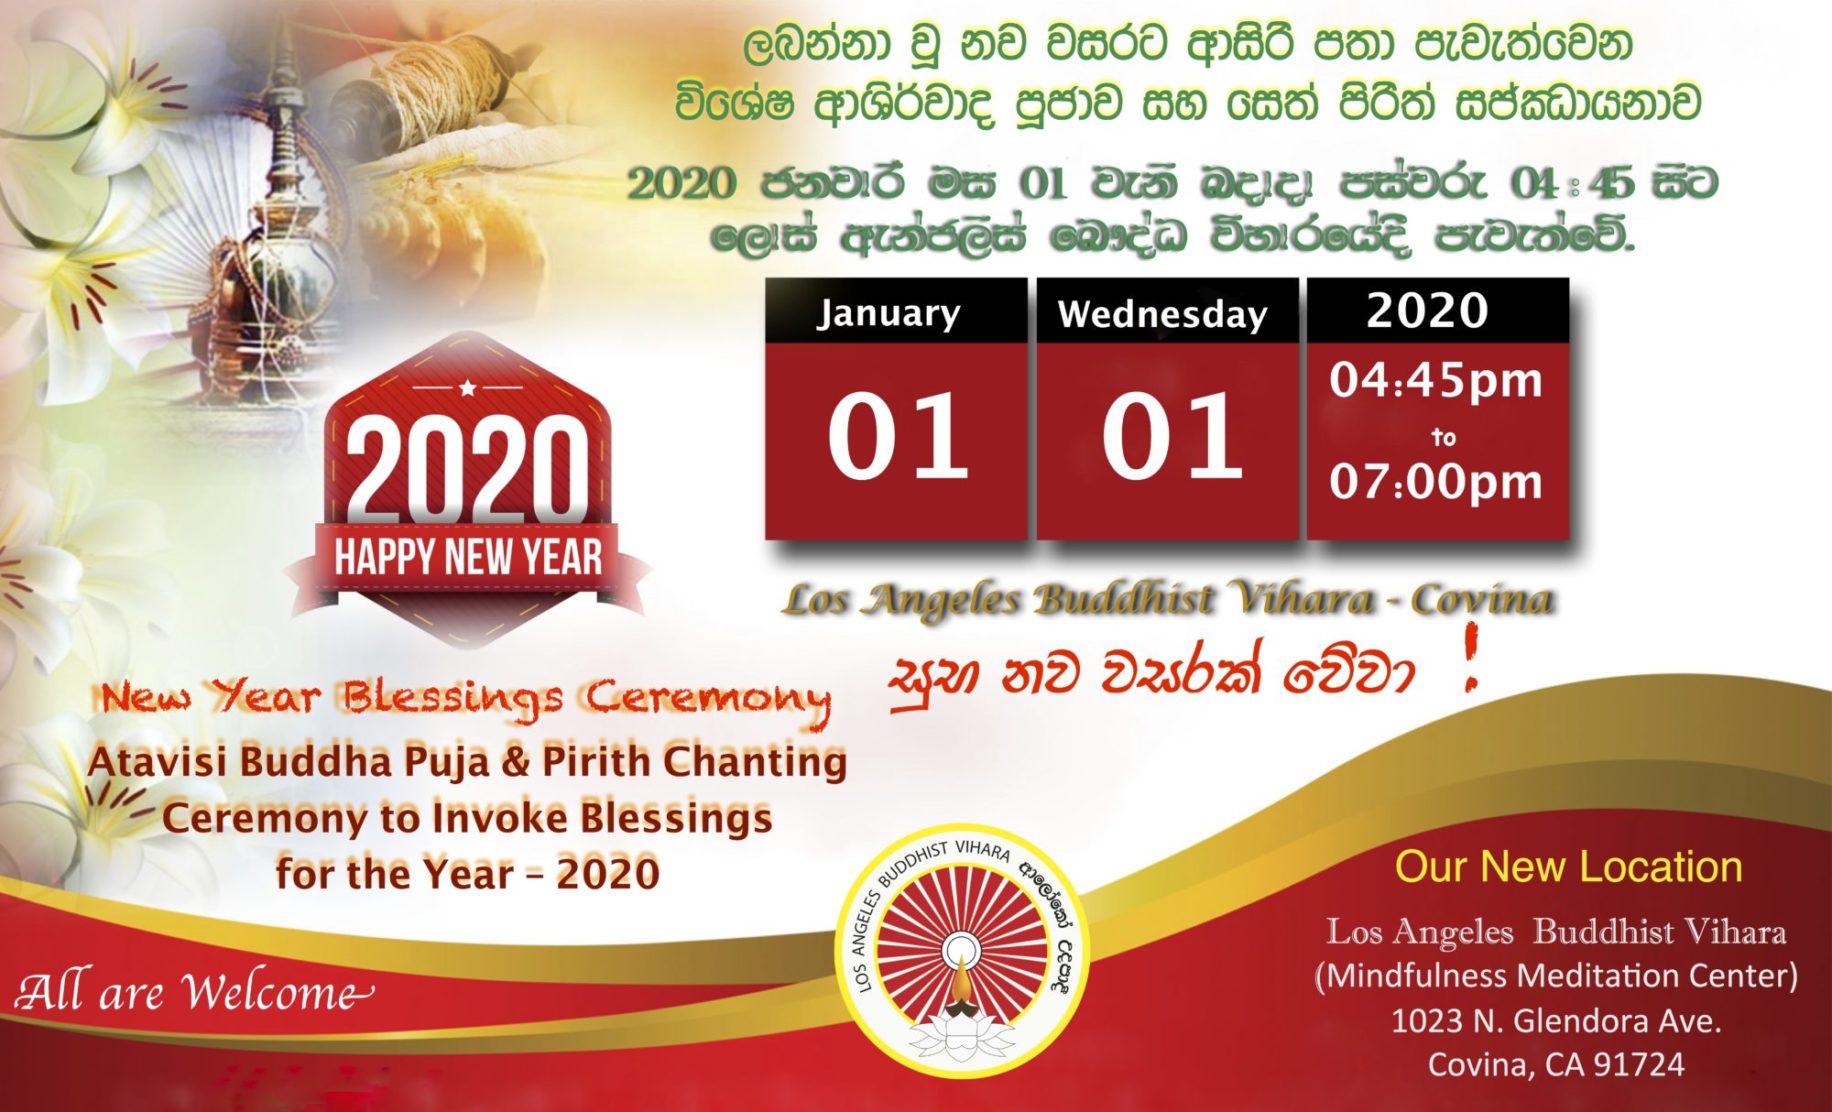 New Year Blessings Ceremony -2020